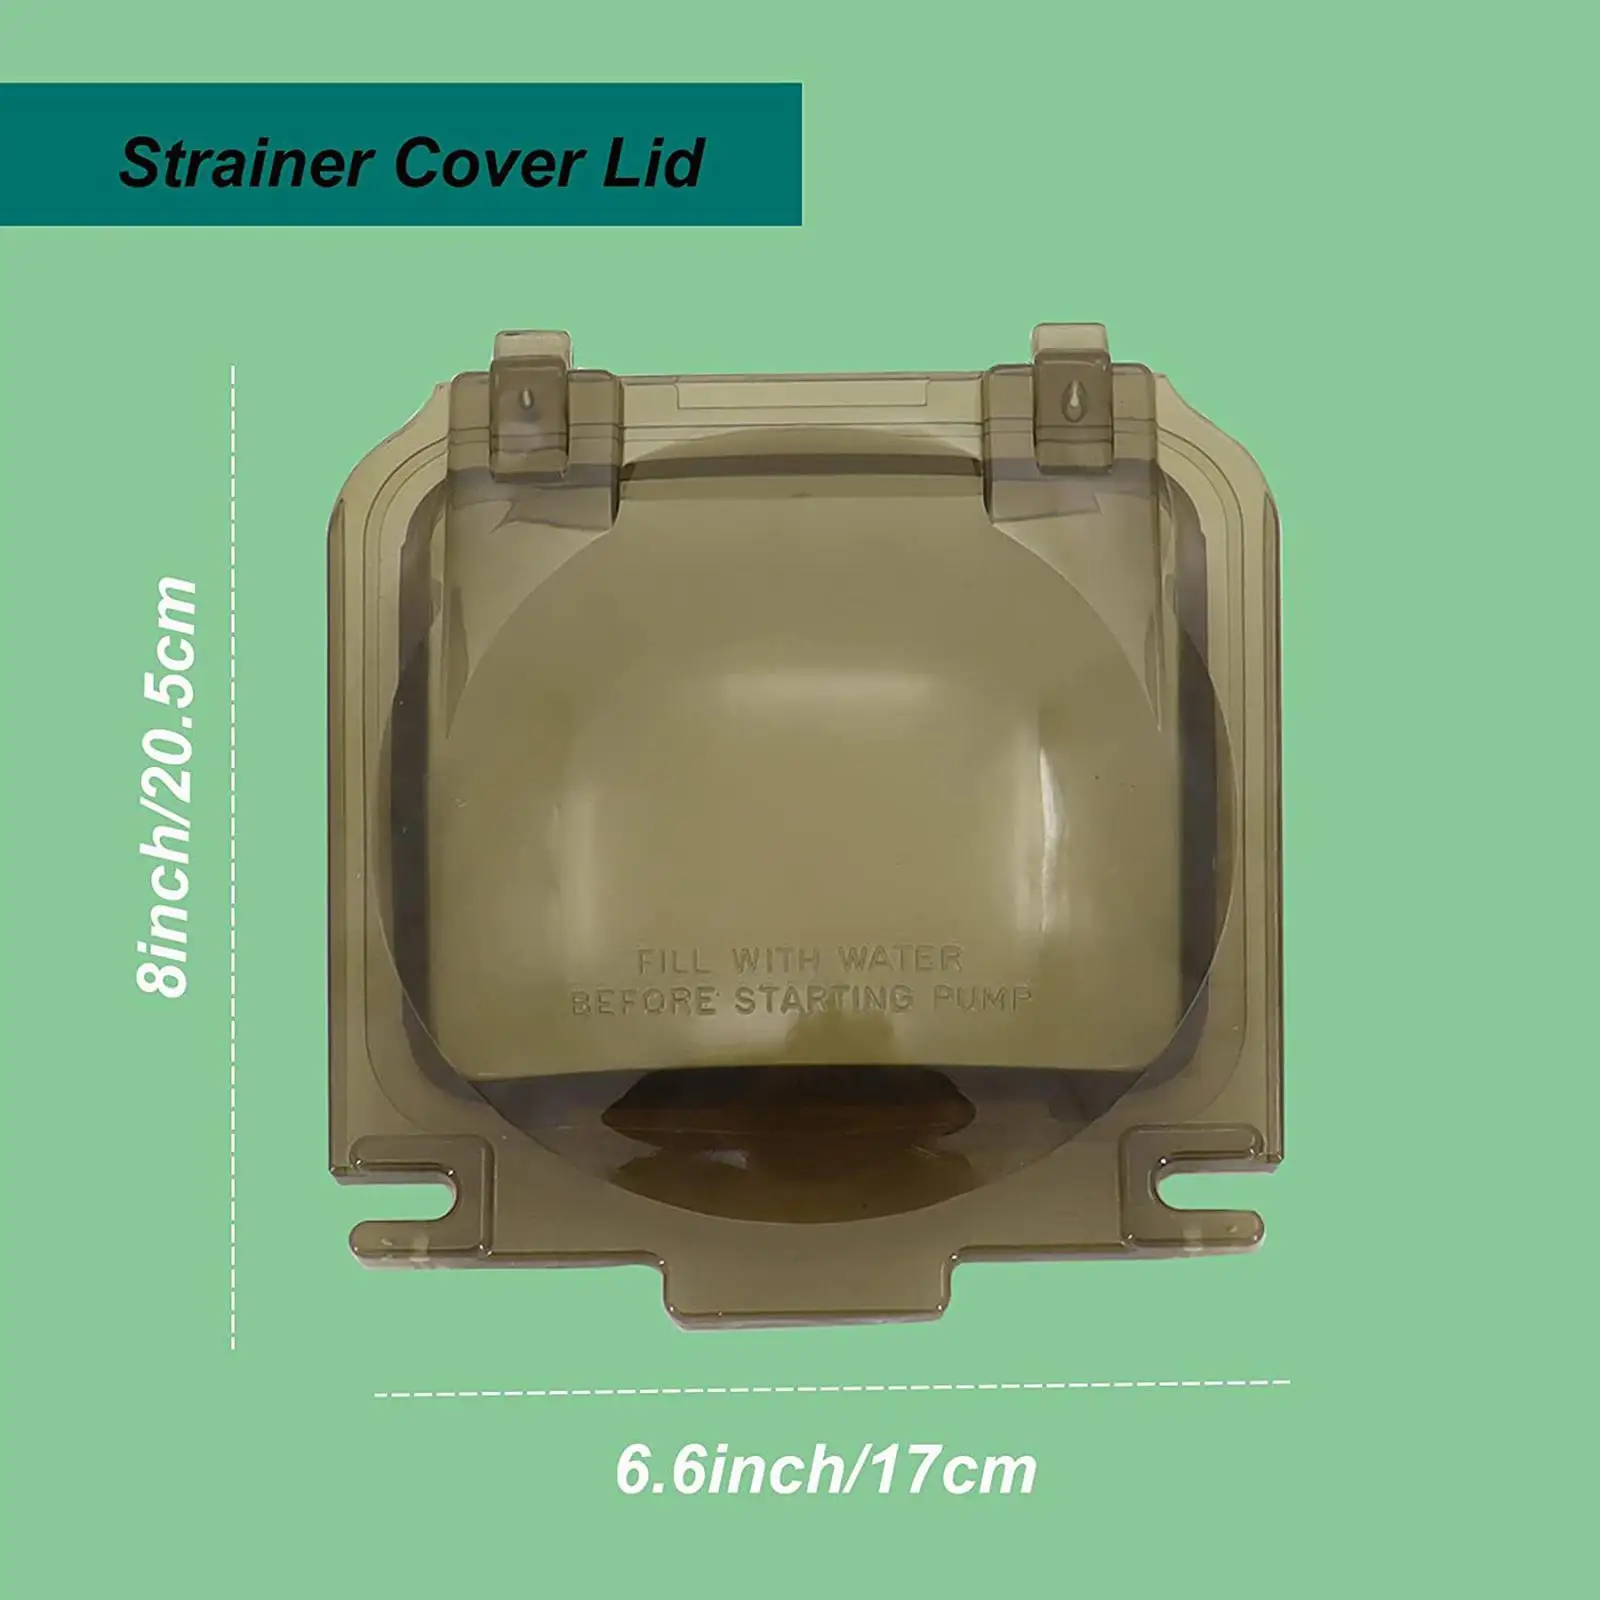 Pool Pump Strainer Cover Lid with Gasket Effective Strong High Strength Pool Cleaning Tools Durable Fittings for SP2600x Series